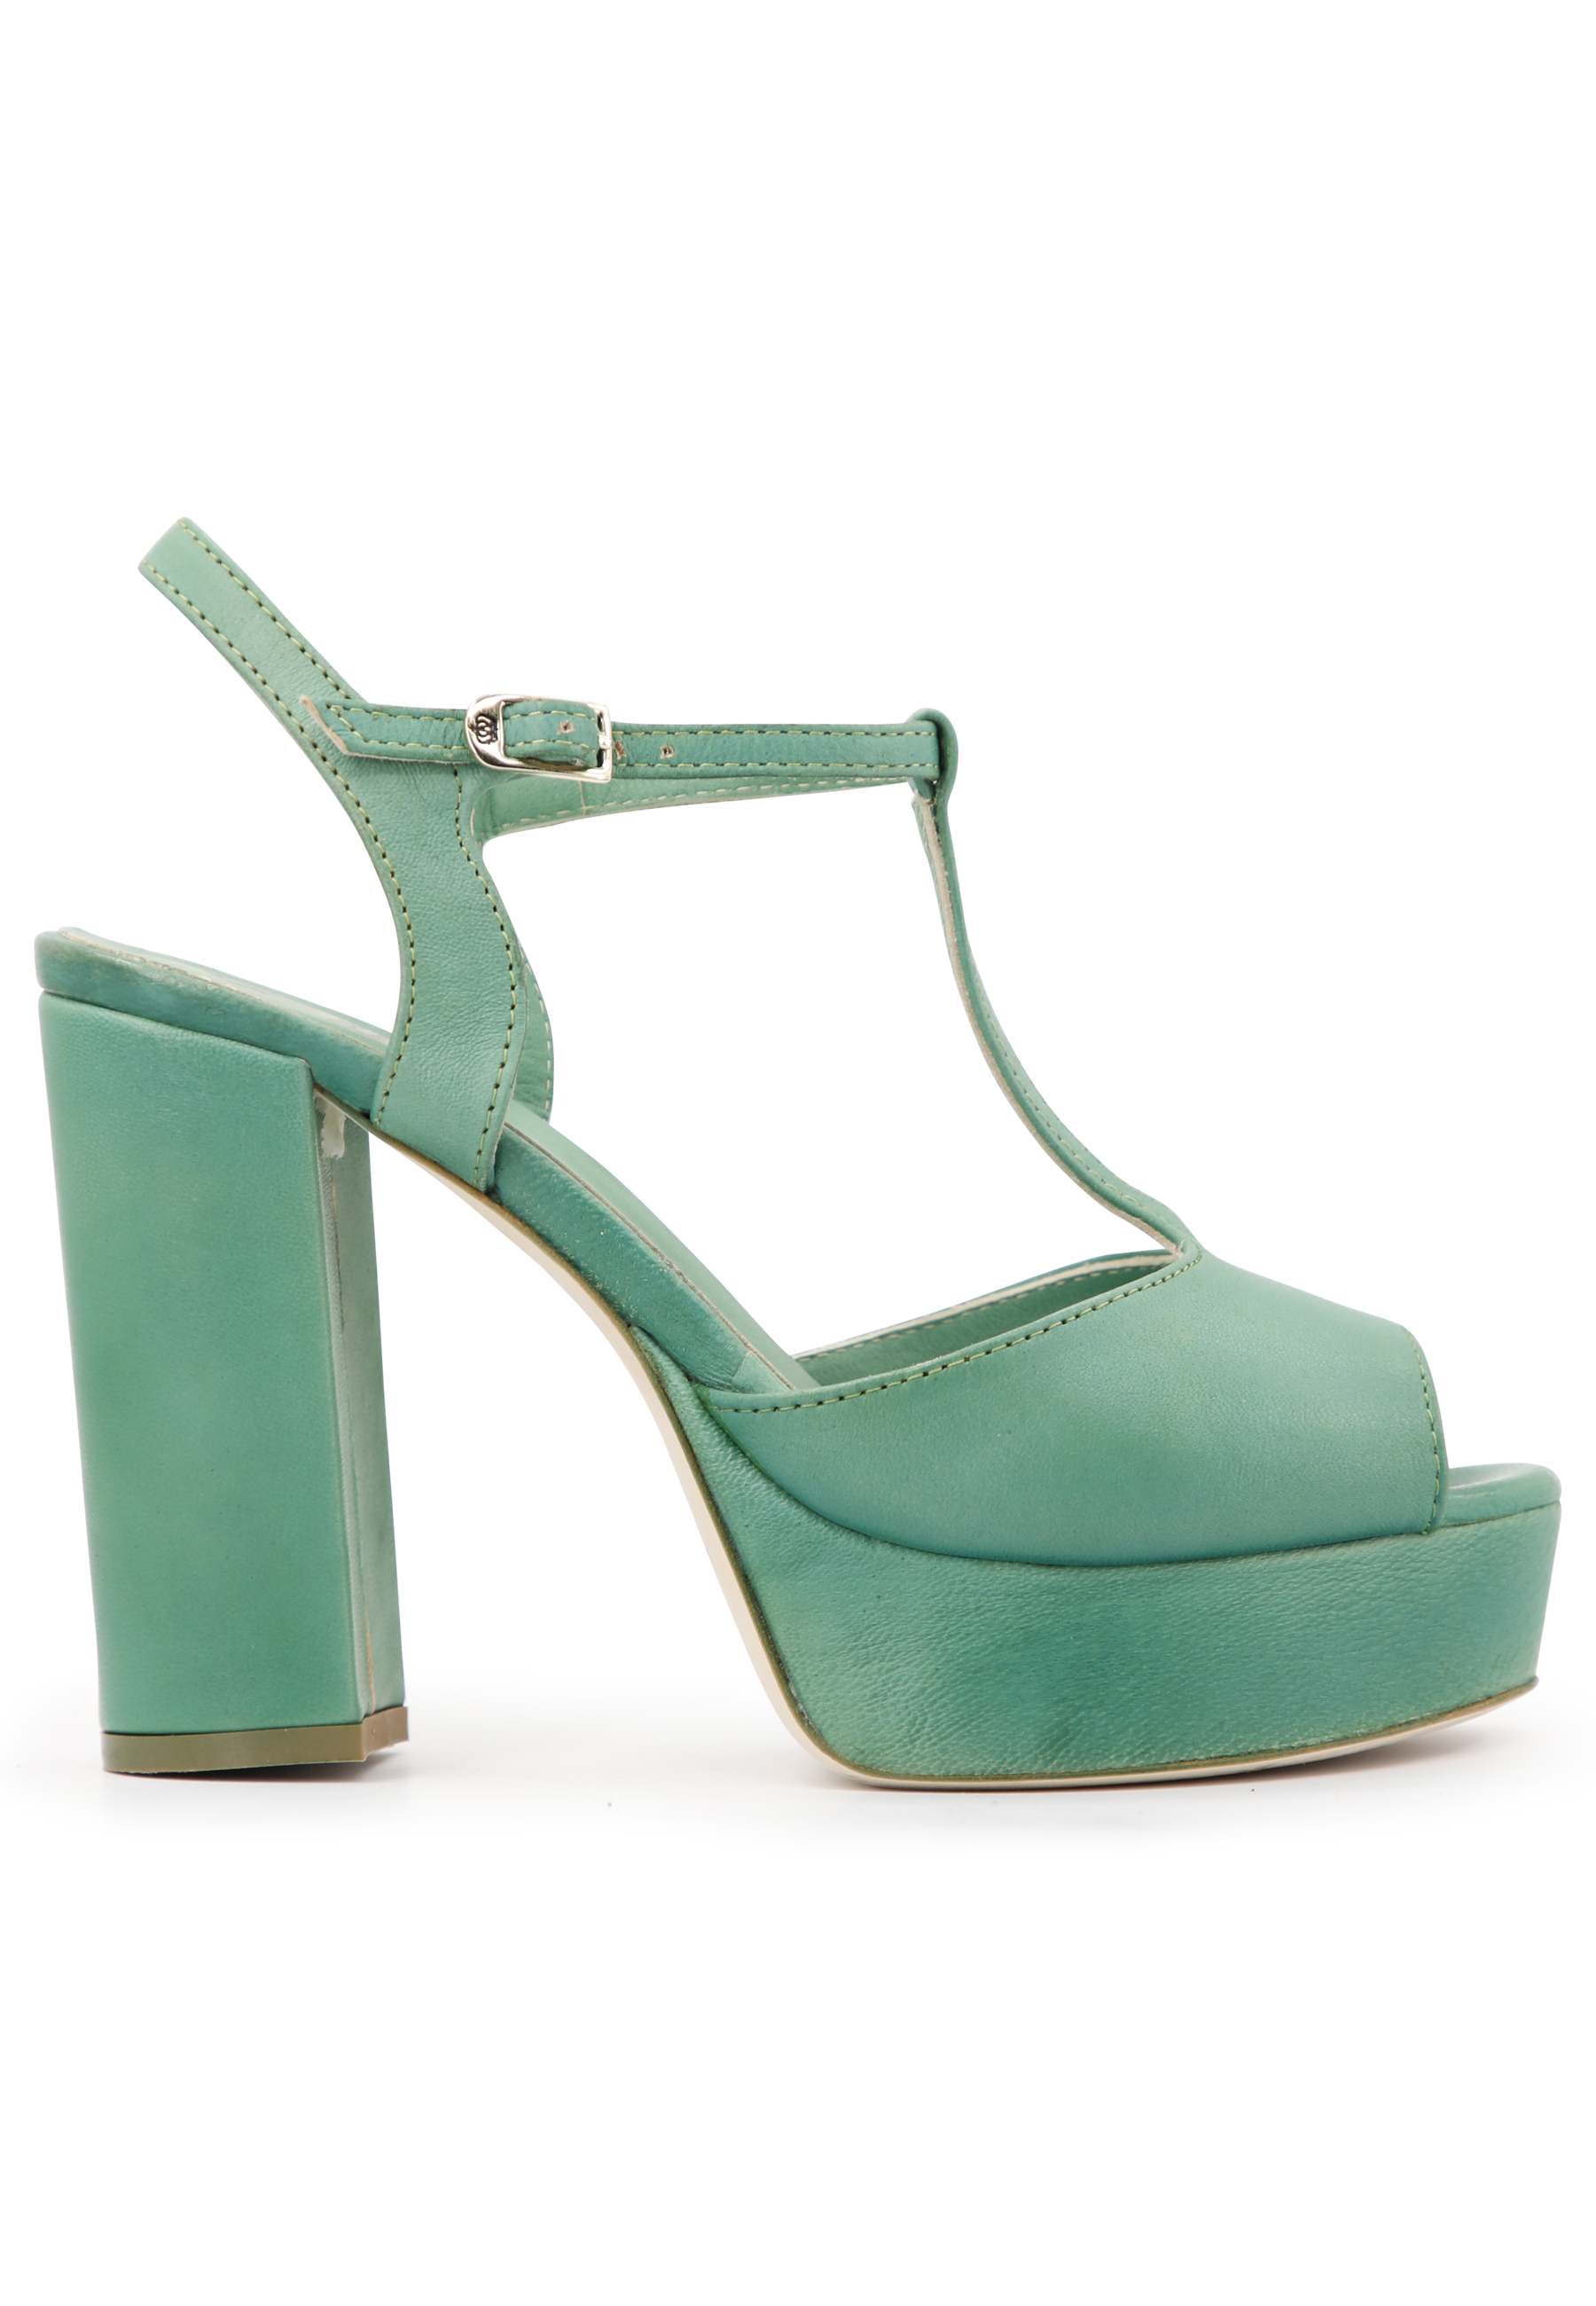 Women's green leather sandals with high heel strap and platform